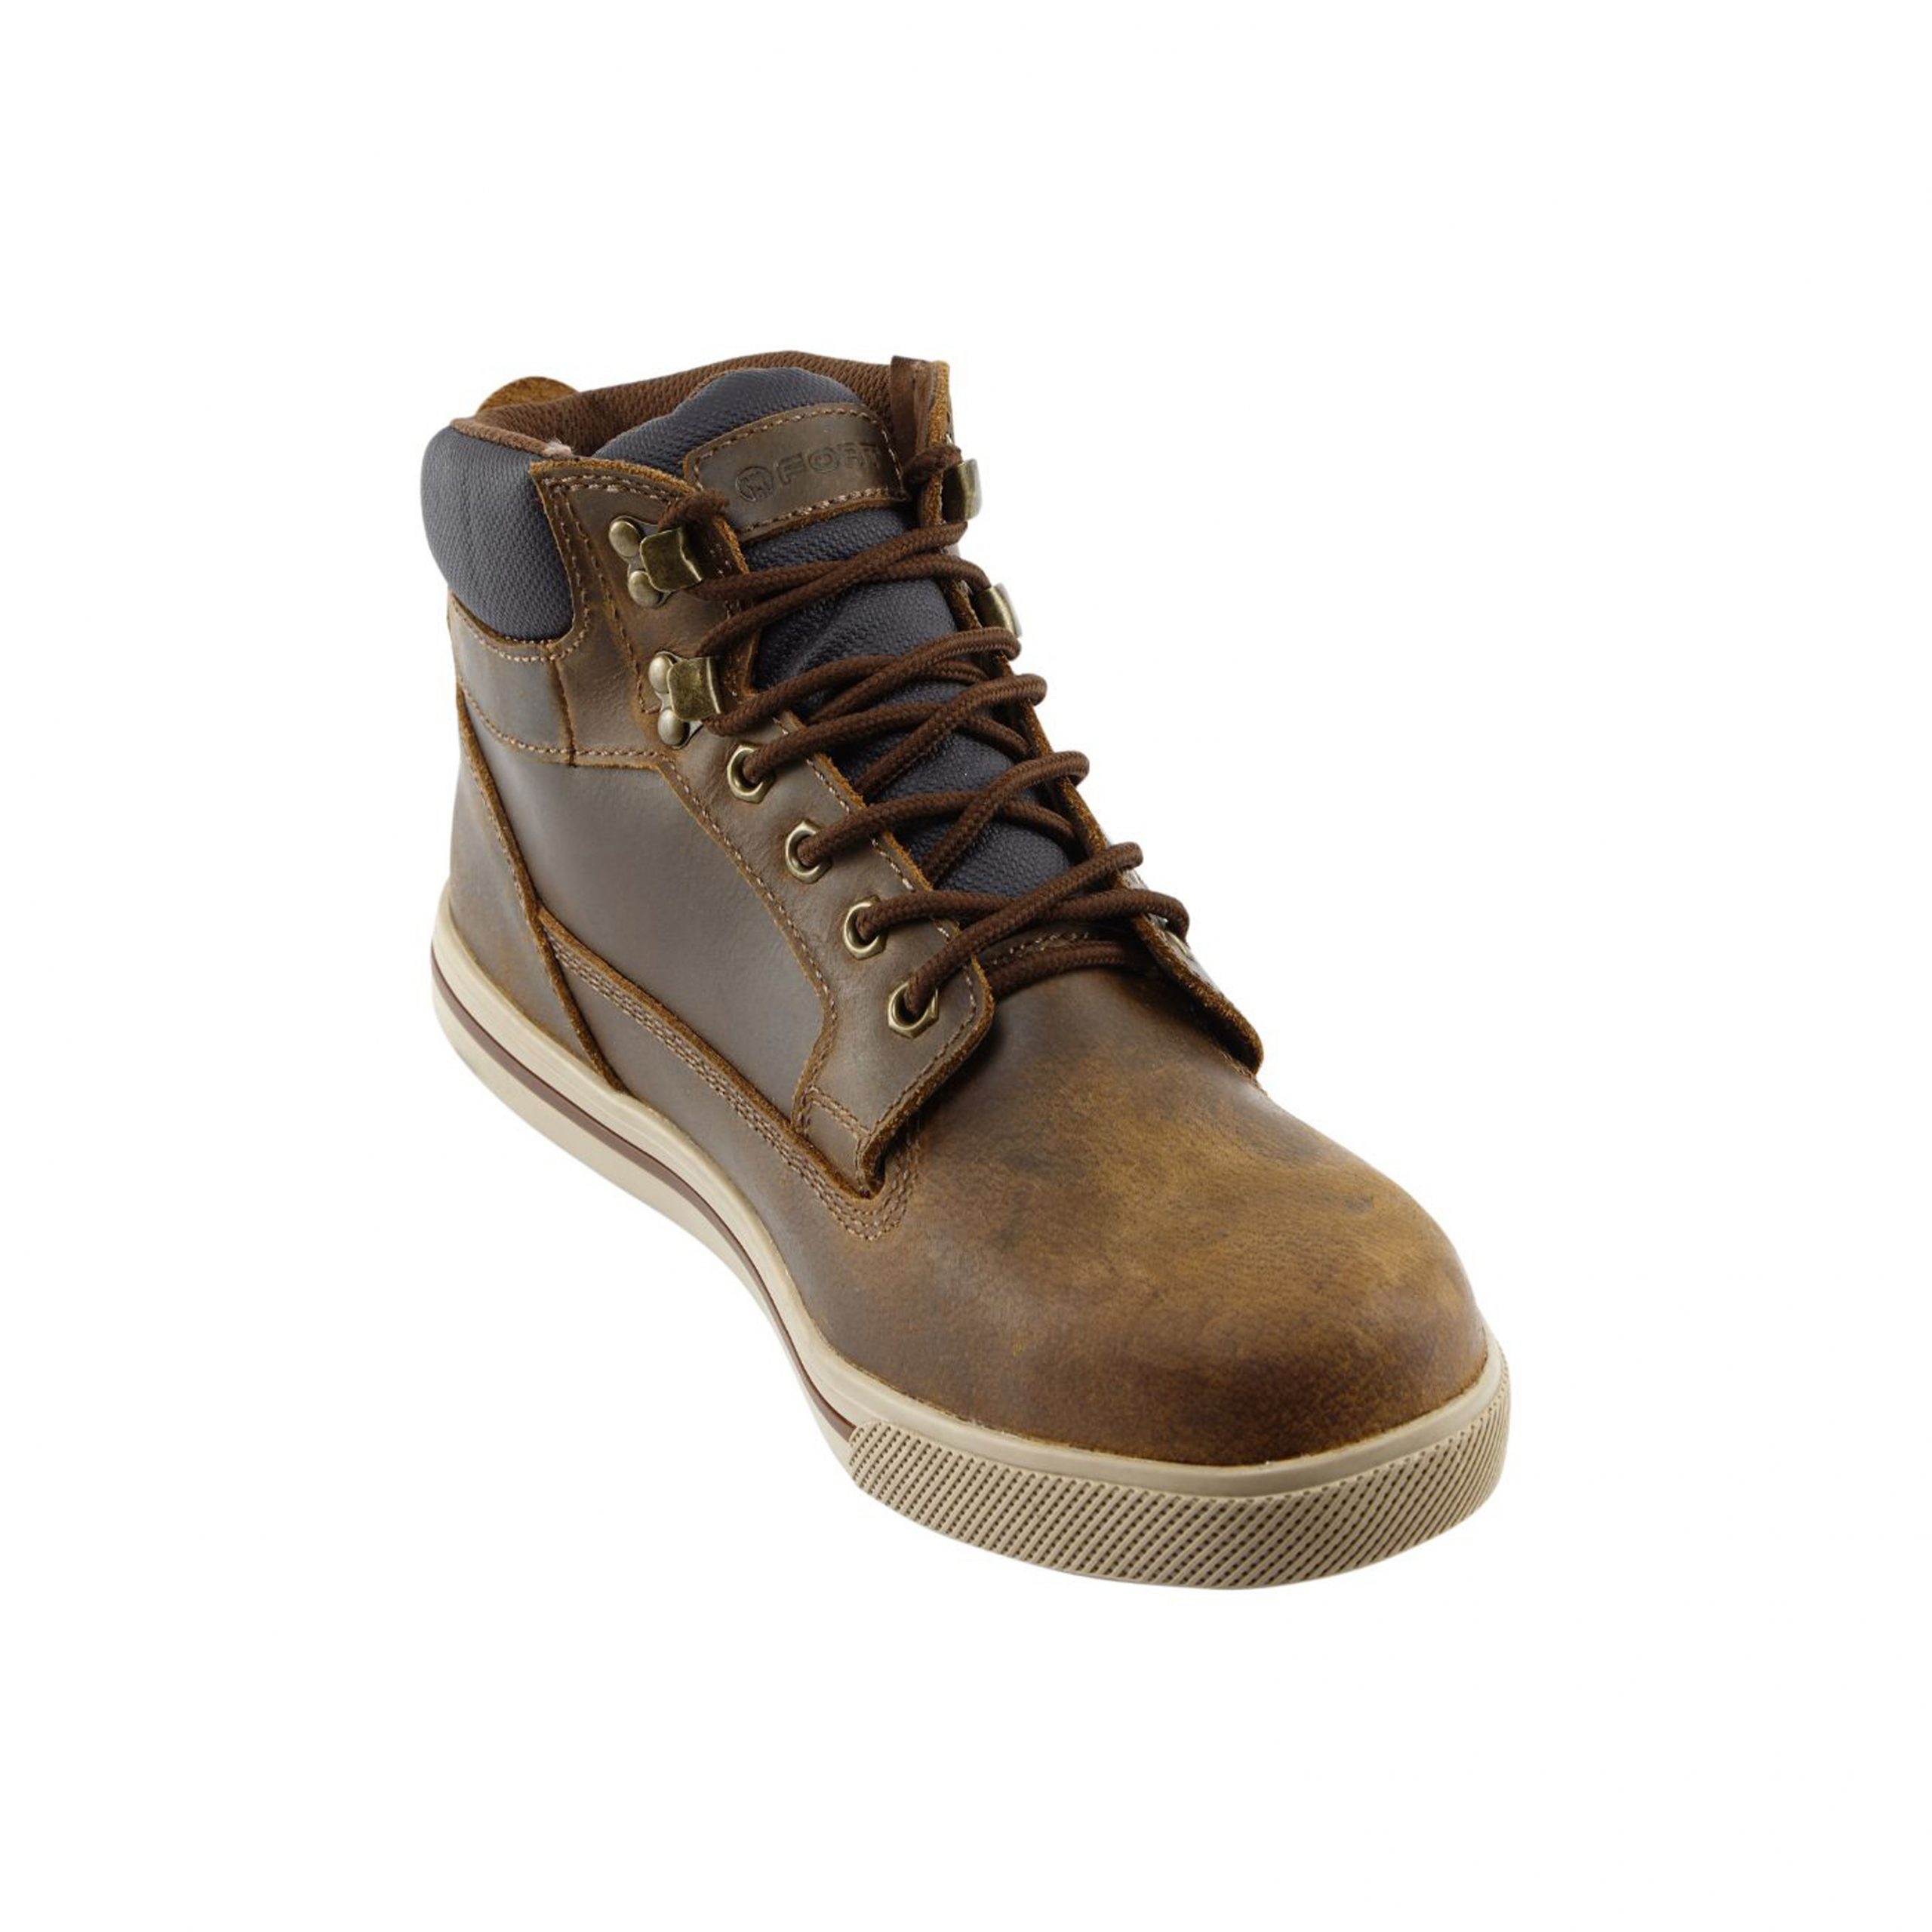 Fort FF110 Compton Safety boot - 1st Work Wear